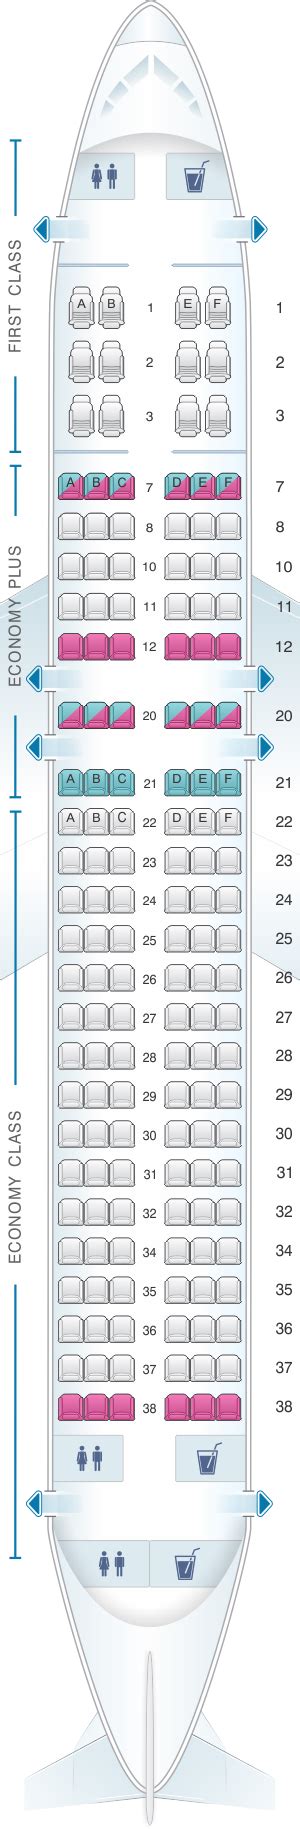 Airbus A320 (32M) Layout 2. Standard Even More Space (Rows 1-5, 10-11) Standard Core (Rows 6-9, 12-27) View map. For your next JetBlue flight, use this seating chart to get the most comfortable seats, legroom, and recline on ..